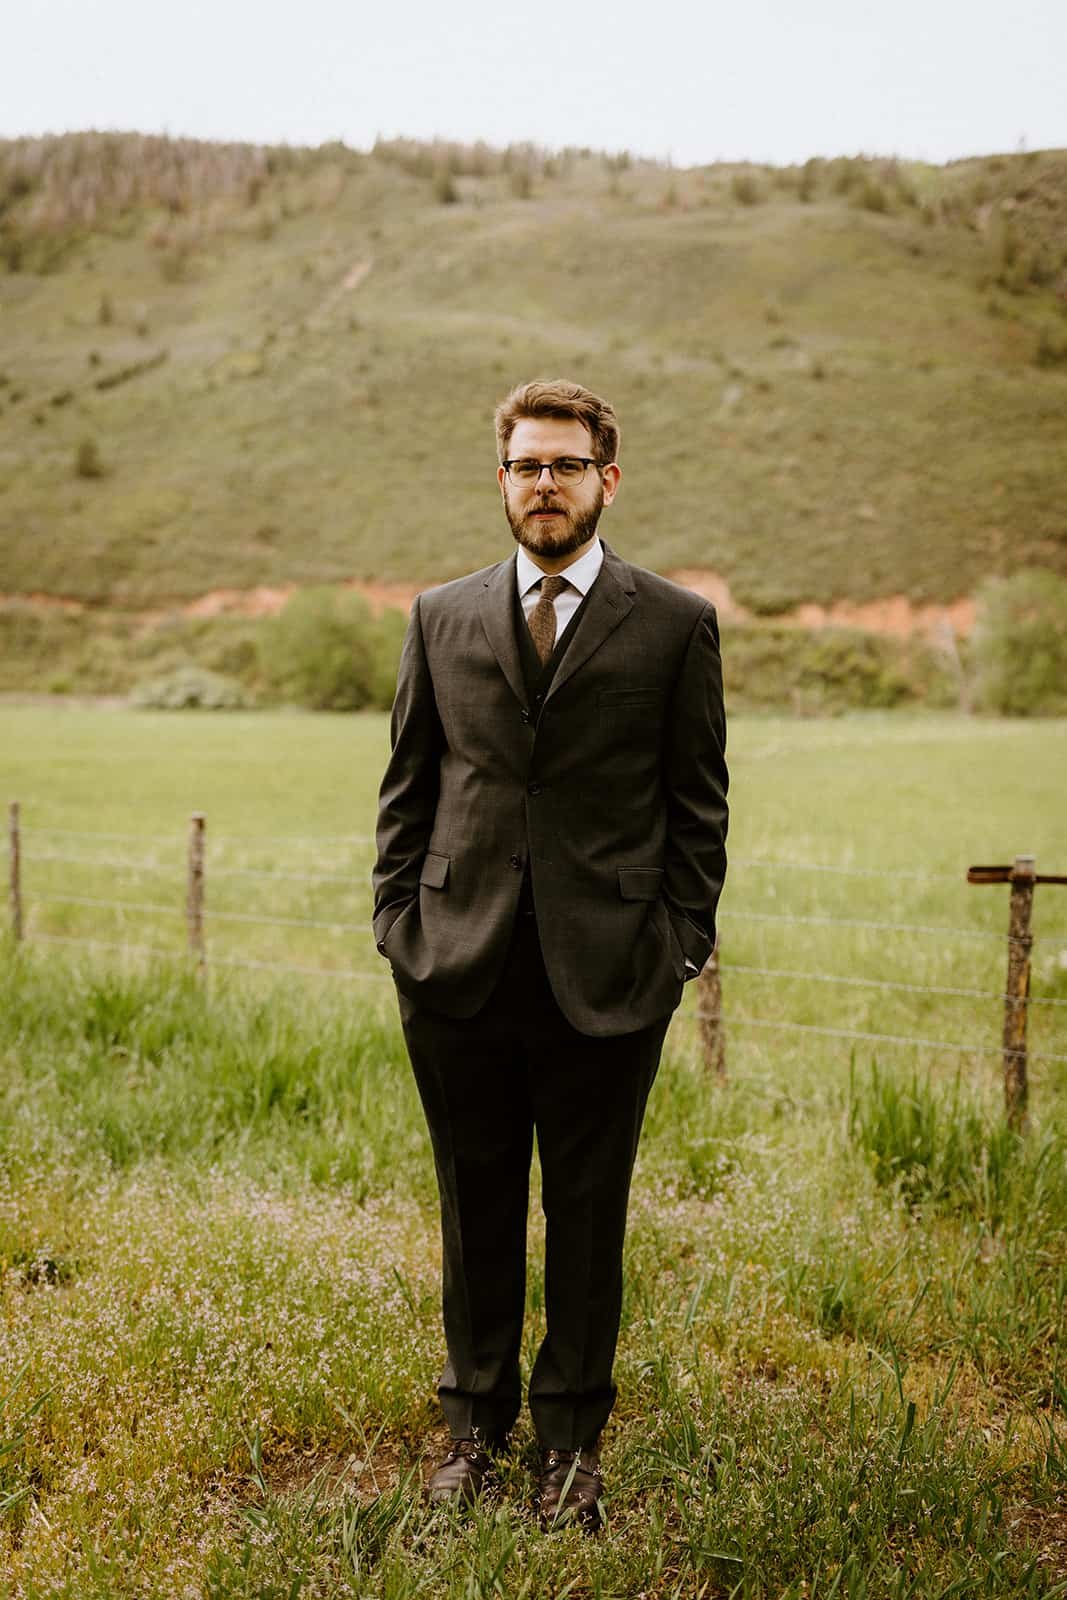 A man faces forward in a suit in a field in Colorado